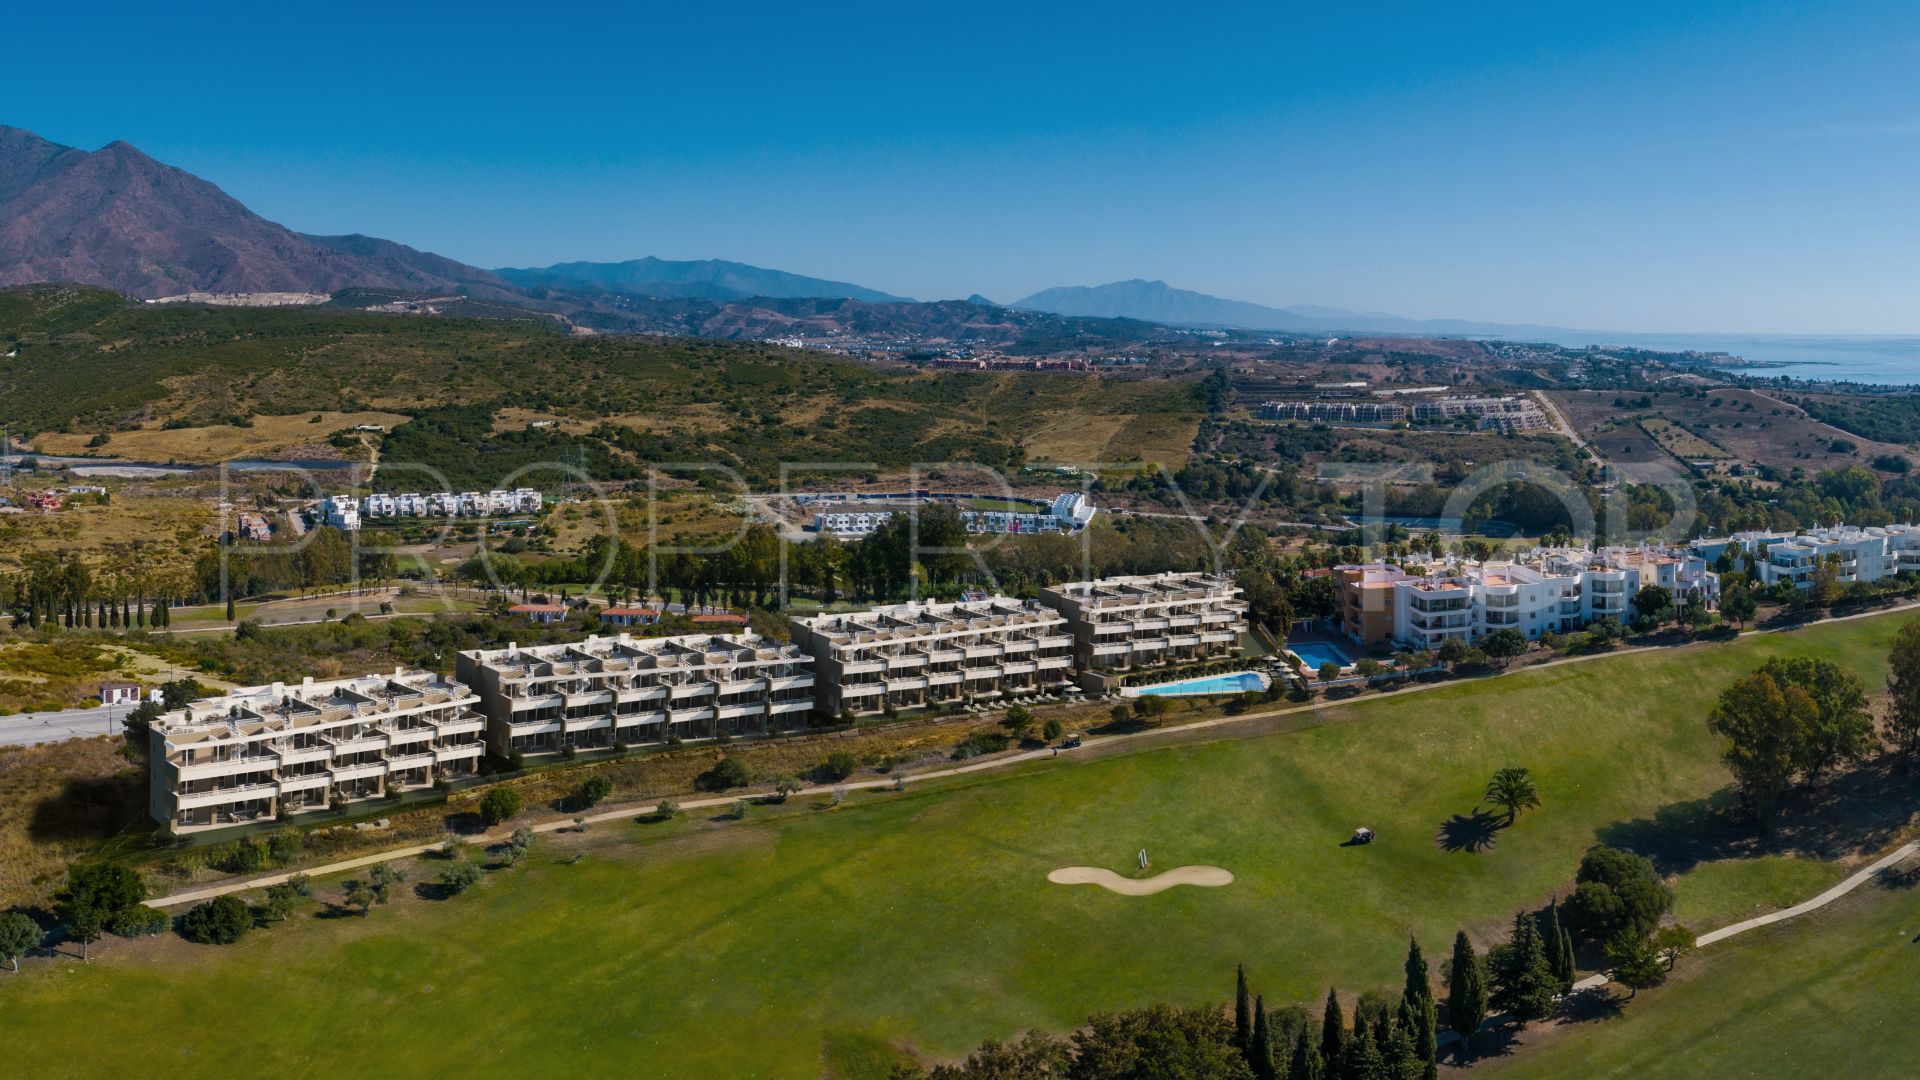 For sale Estepona Golf ground floor apartment with 3 bedrooms